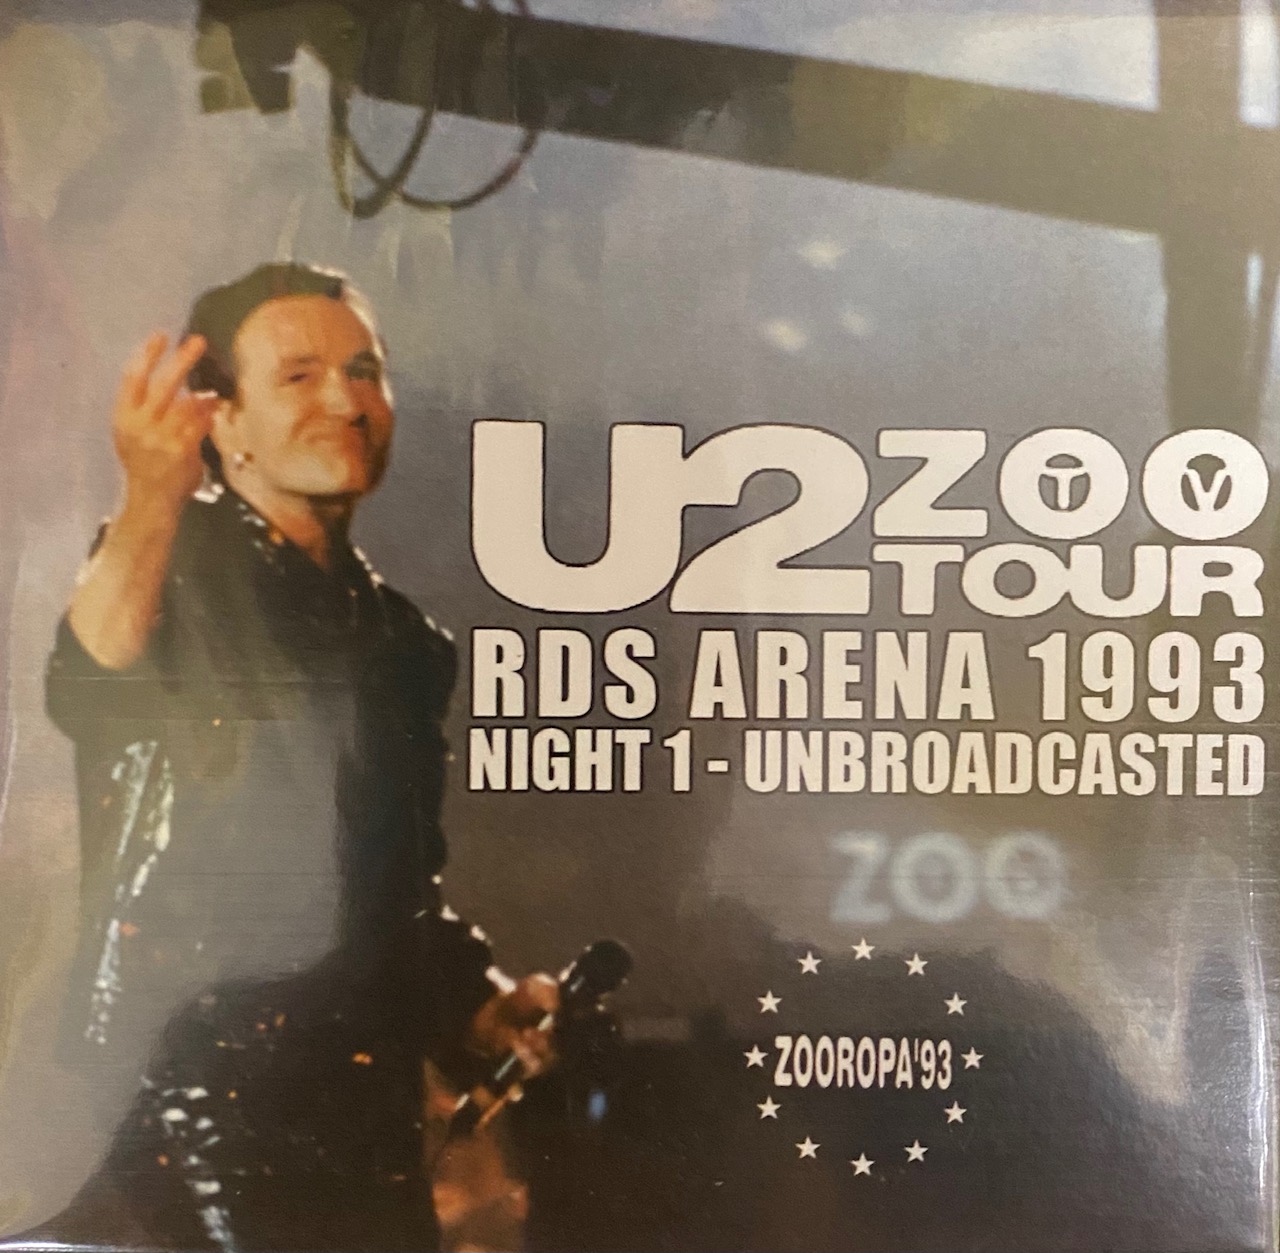 U2 - RDS ARENA 1993, NIGHT 1 - UNBROADCASTED